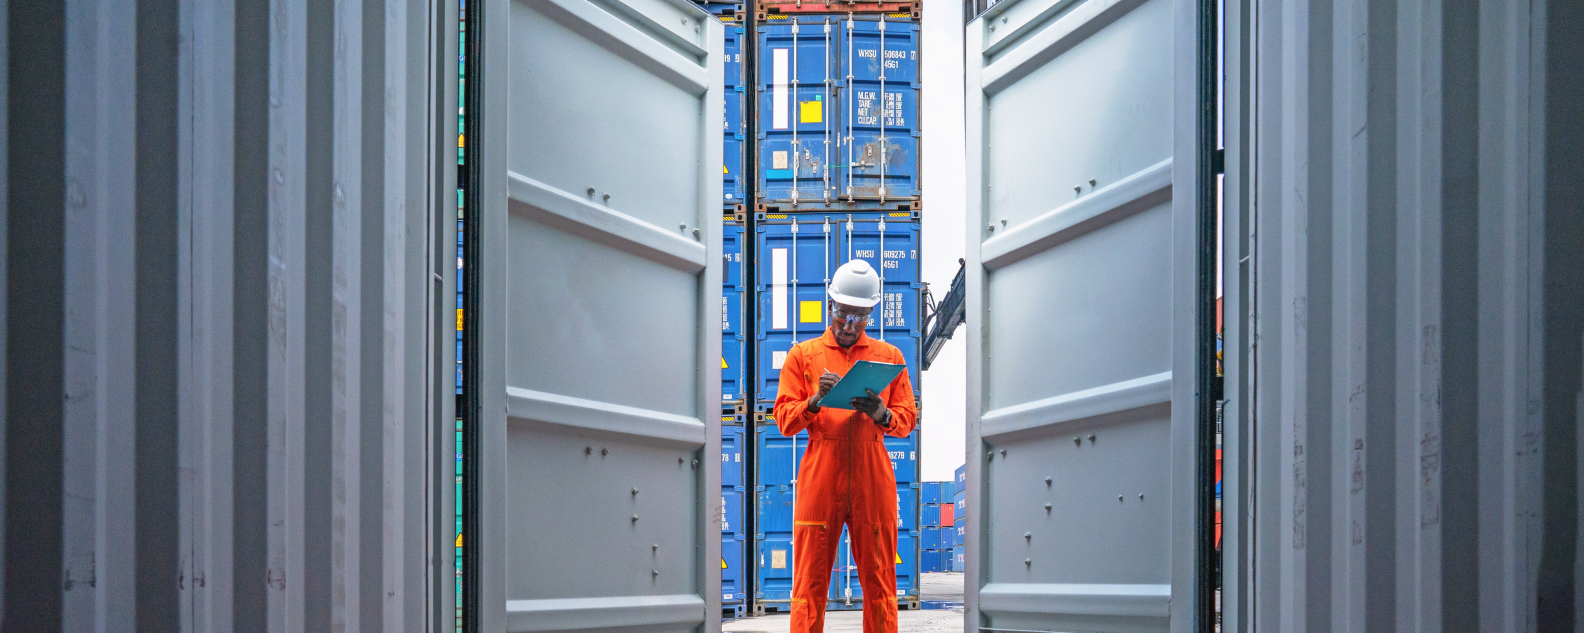 Dock worker with clipboard looking inside a shipping container